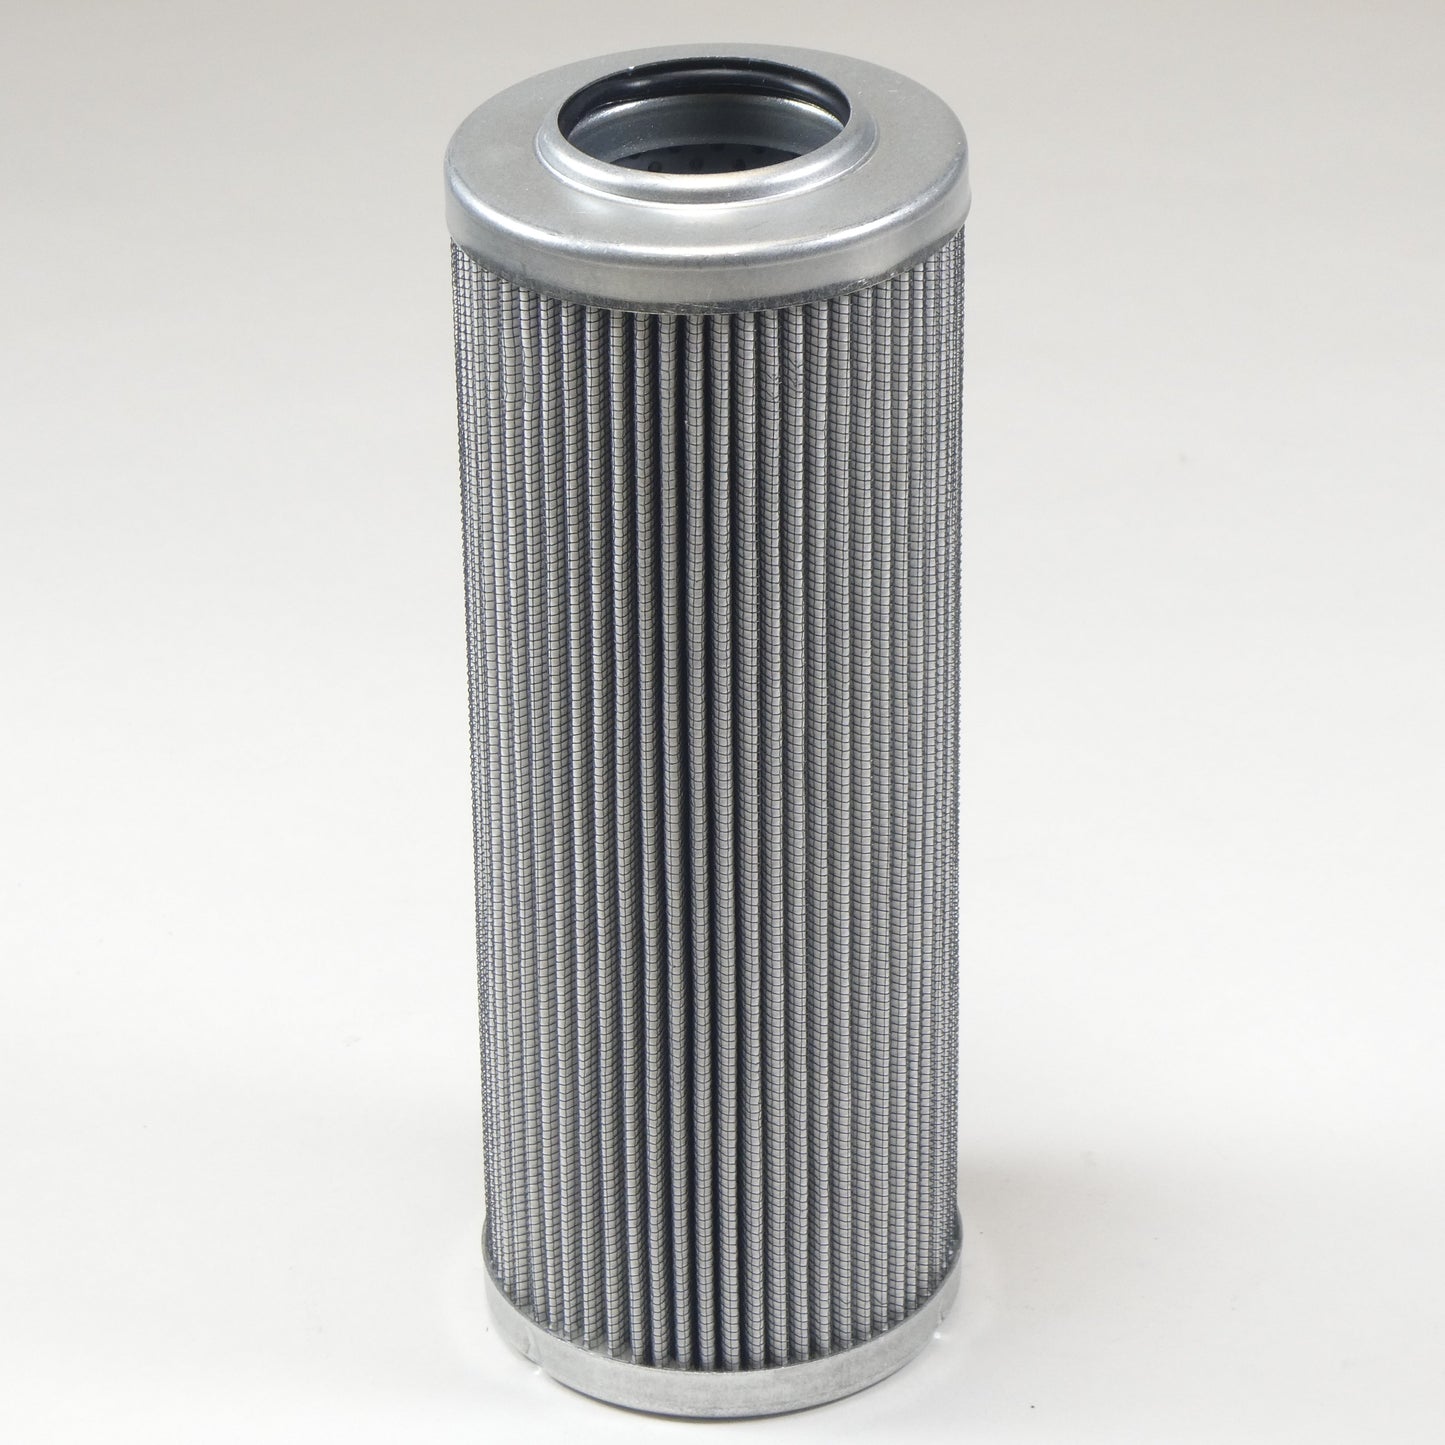 Hydrafil Replacement Filter Element for Hilco 3830-11-096-C